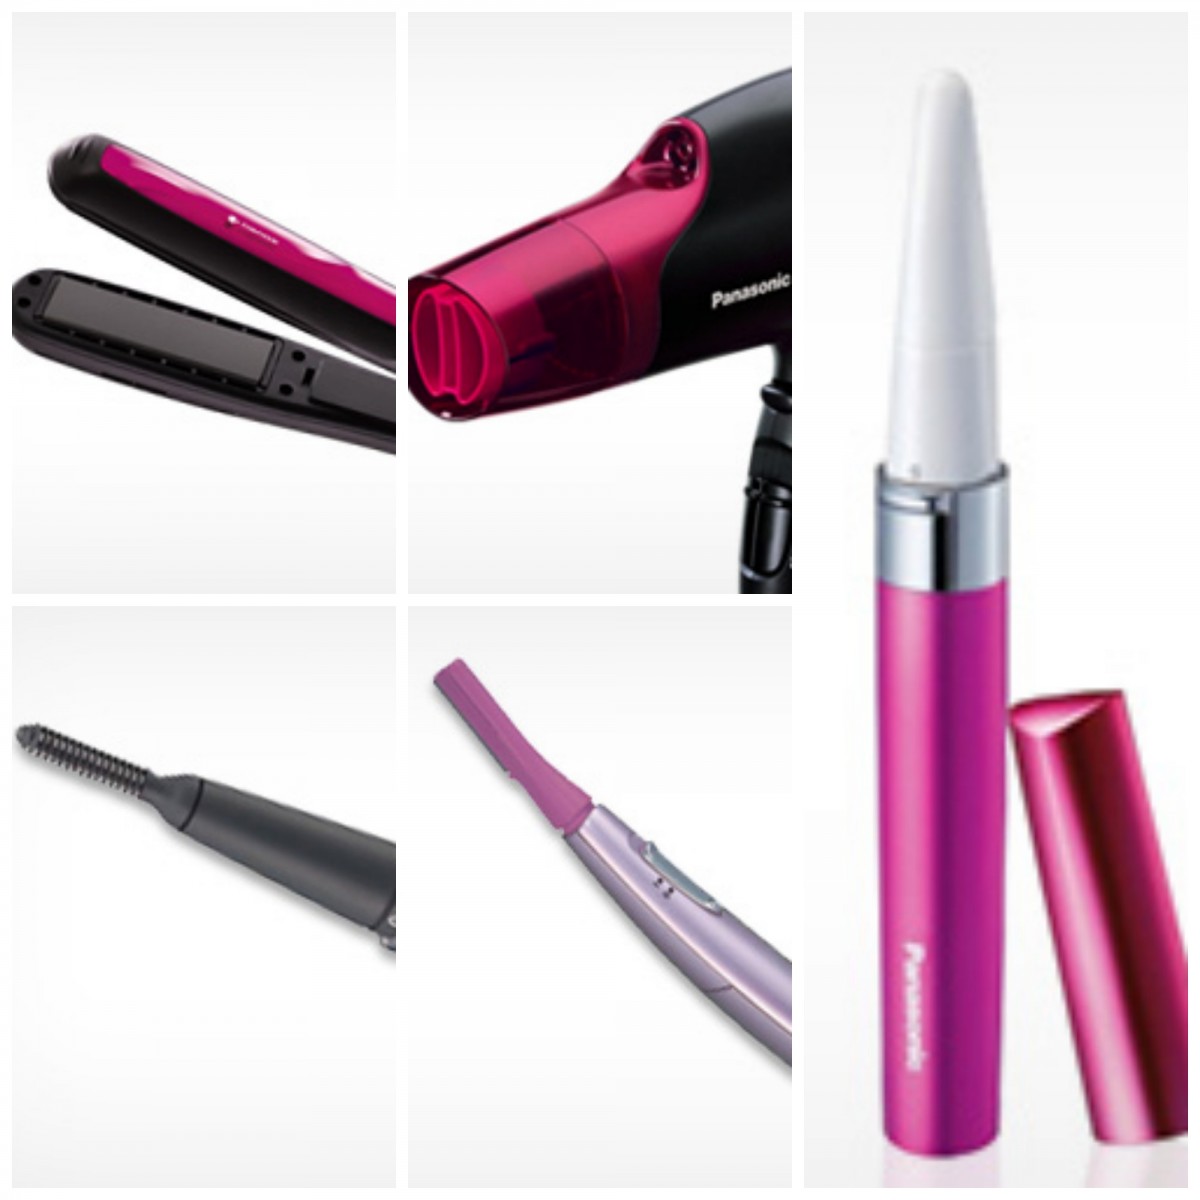 Giveaway: 5 Will Win The Panasonic Beauty Tool Of Their Choice